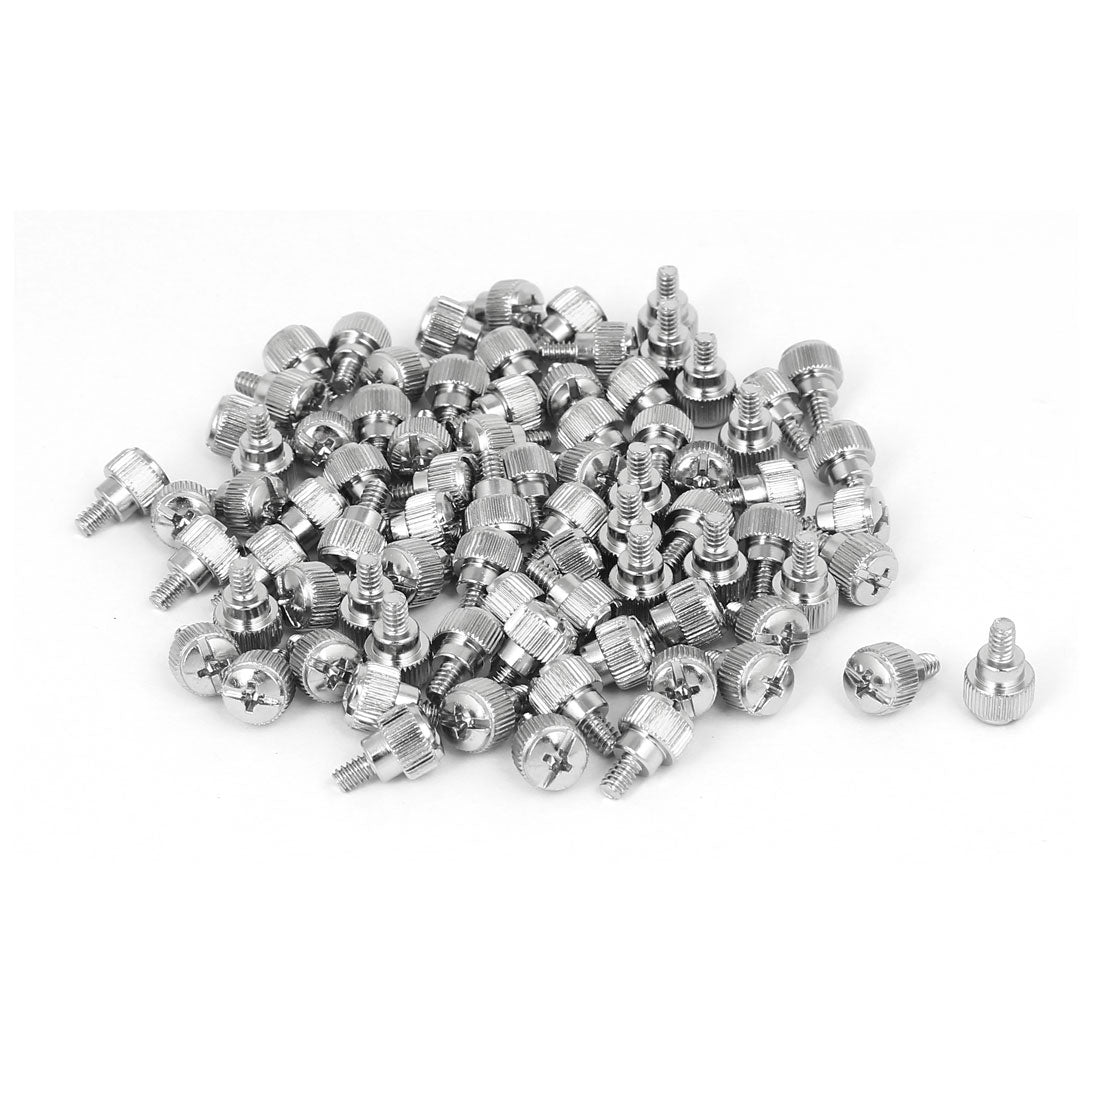 Uxcell Uxcell 6#-32 Nickel Plated Knurled Phillips Head Thumb Screw 80pcs for Computer PC Case